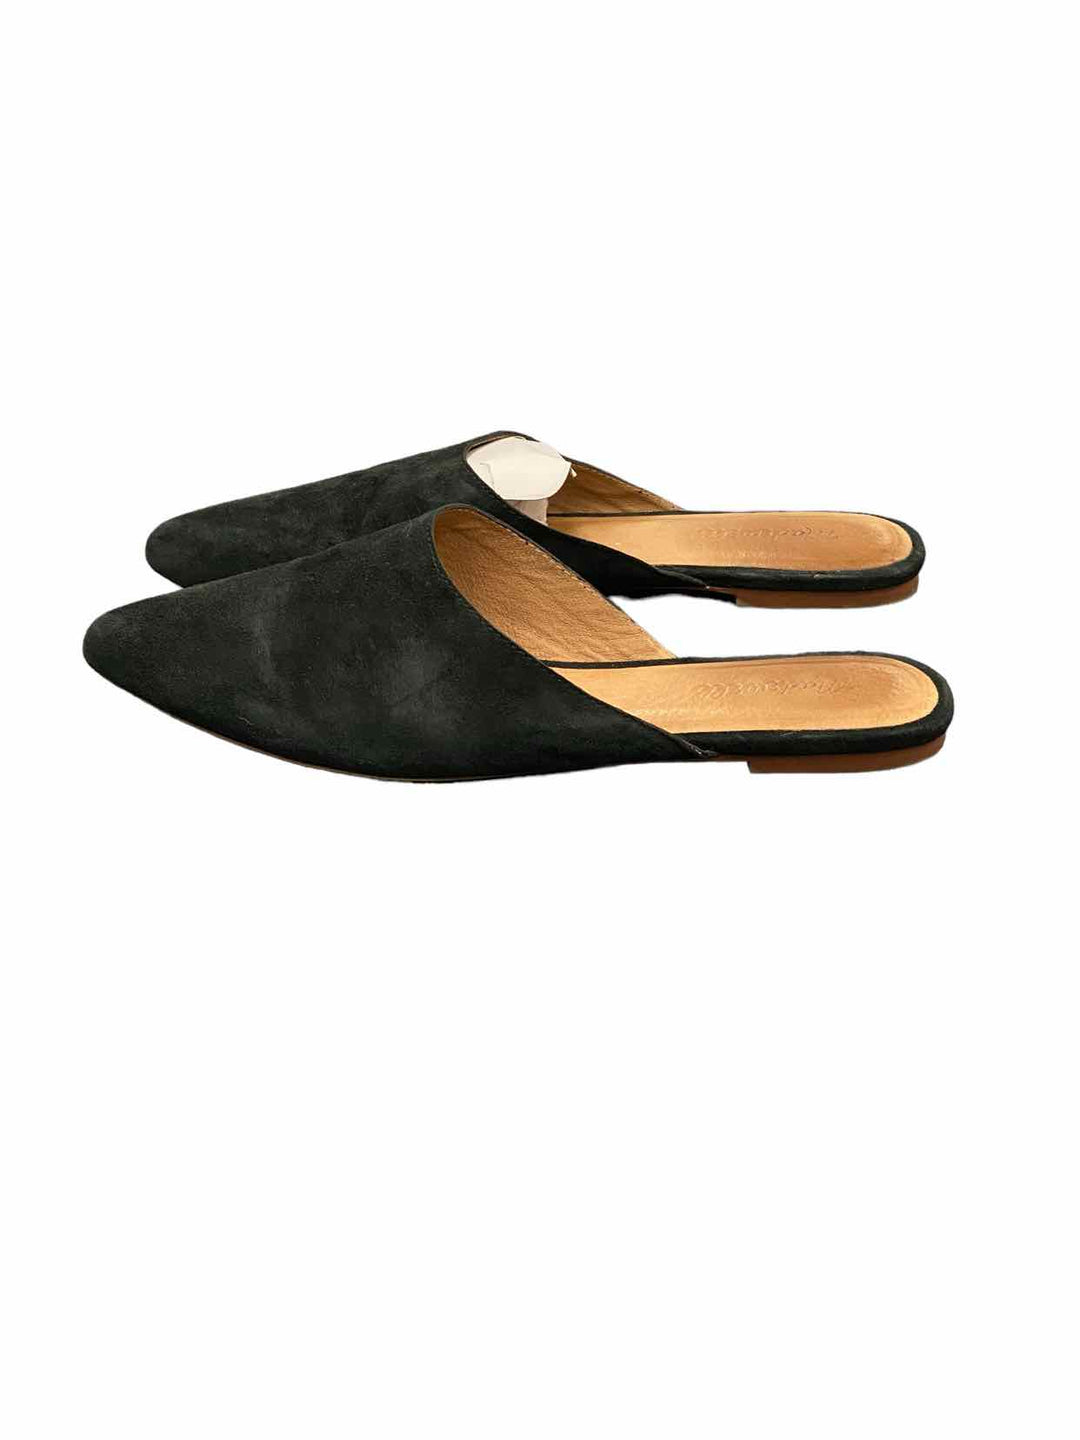 Madewell Shoe Size 6 Black Suede Flats